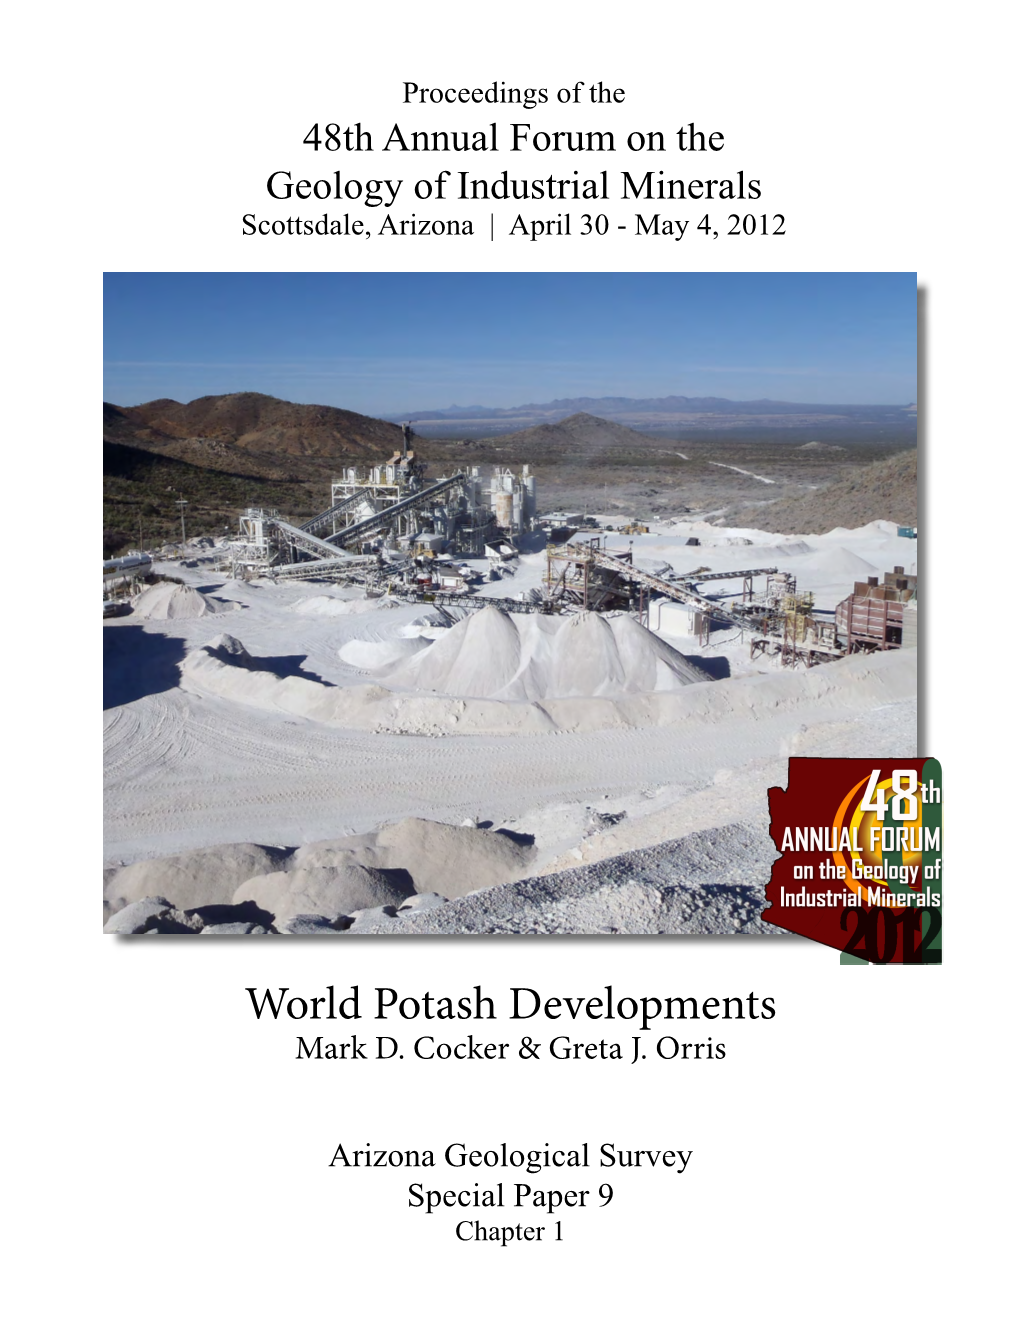 Chapter 1 Proceedings of the 48Th Annual Forum on the Geology of Industrial Minerals Scottsdale, Arizona | April 30 - May 4, 2012